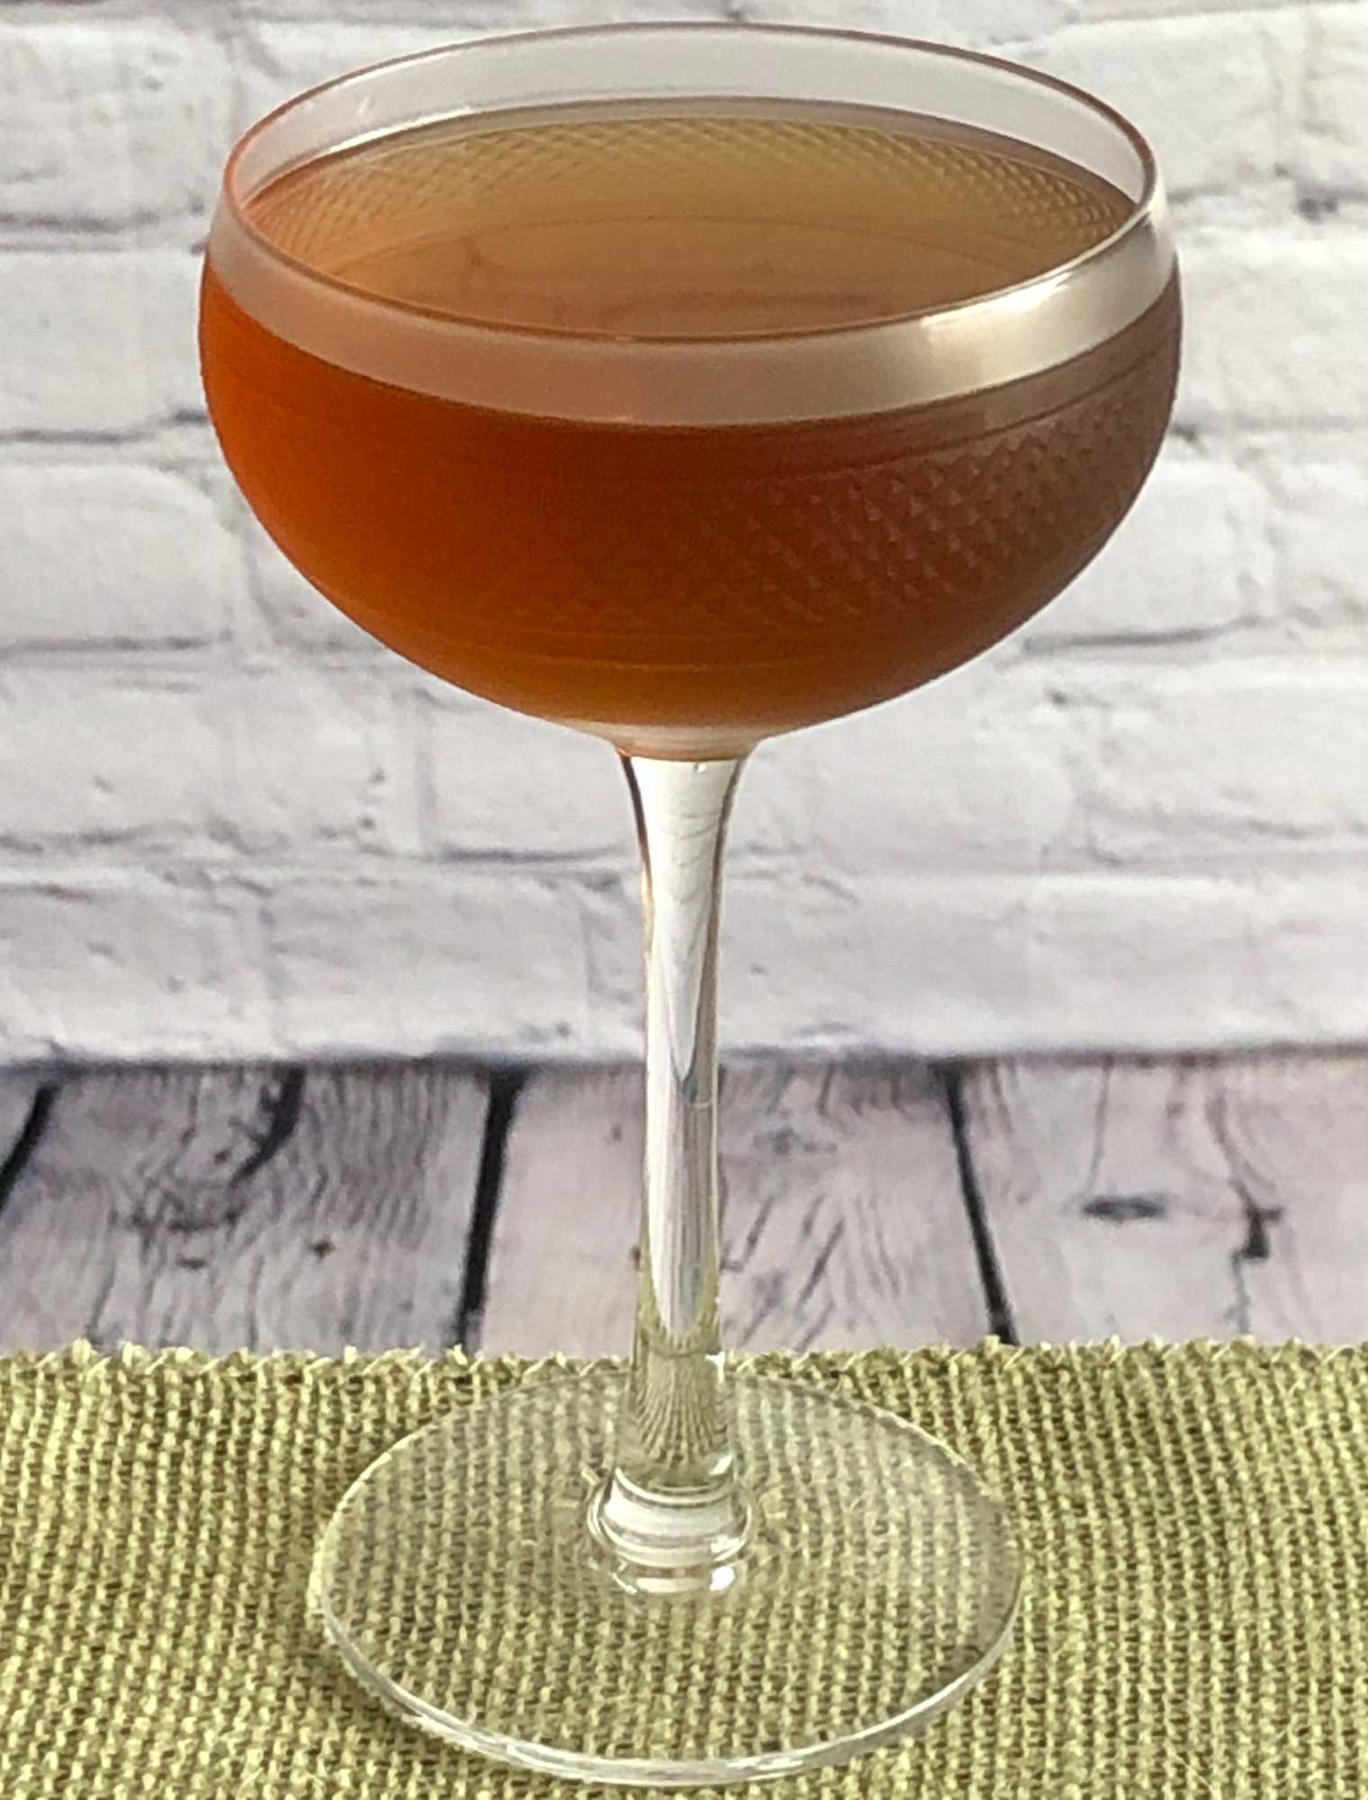 An example of the Nod to Ada Coleman, the mixed drink (drink), by Ada Coleman, featuring Hayman’s London Dry Gin, Dolin Rouge Vermouth de Chambéry, Elisir Novasalus, and orange bitters; photo by Lee Edwards